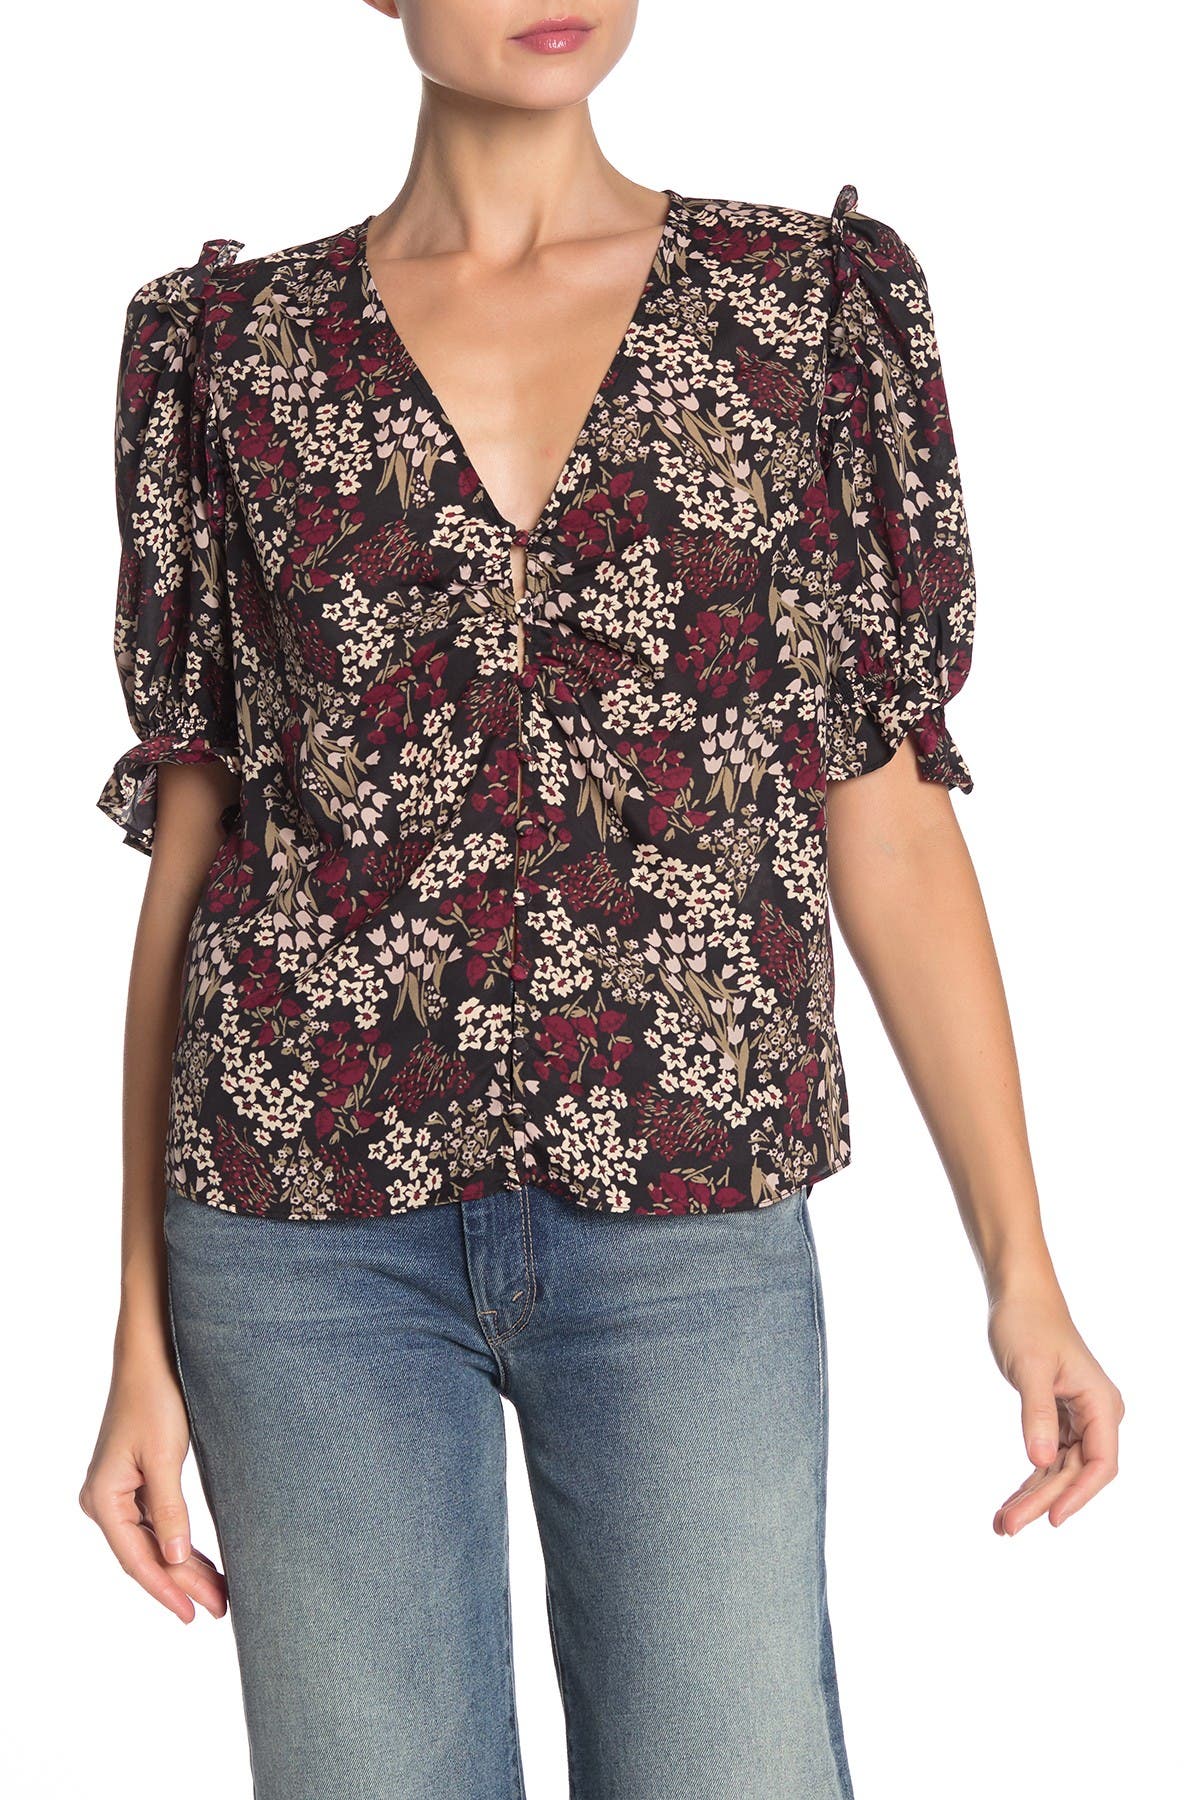 Joie | Anevy Floral Puff Sleeve Top 